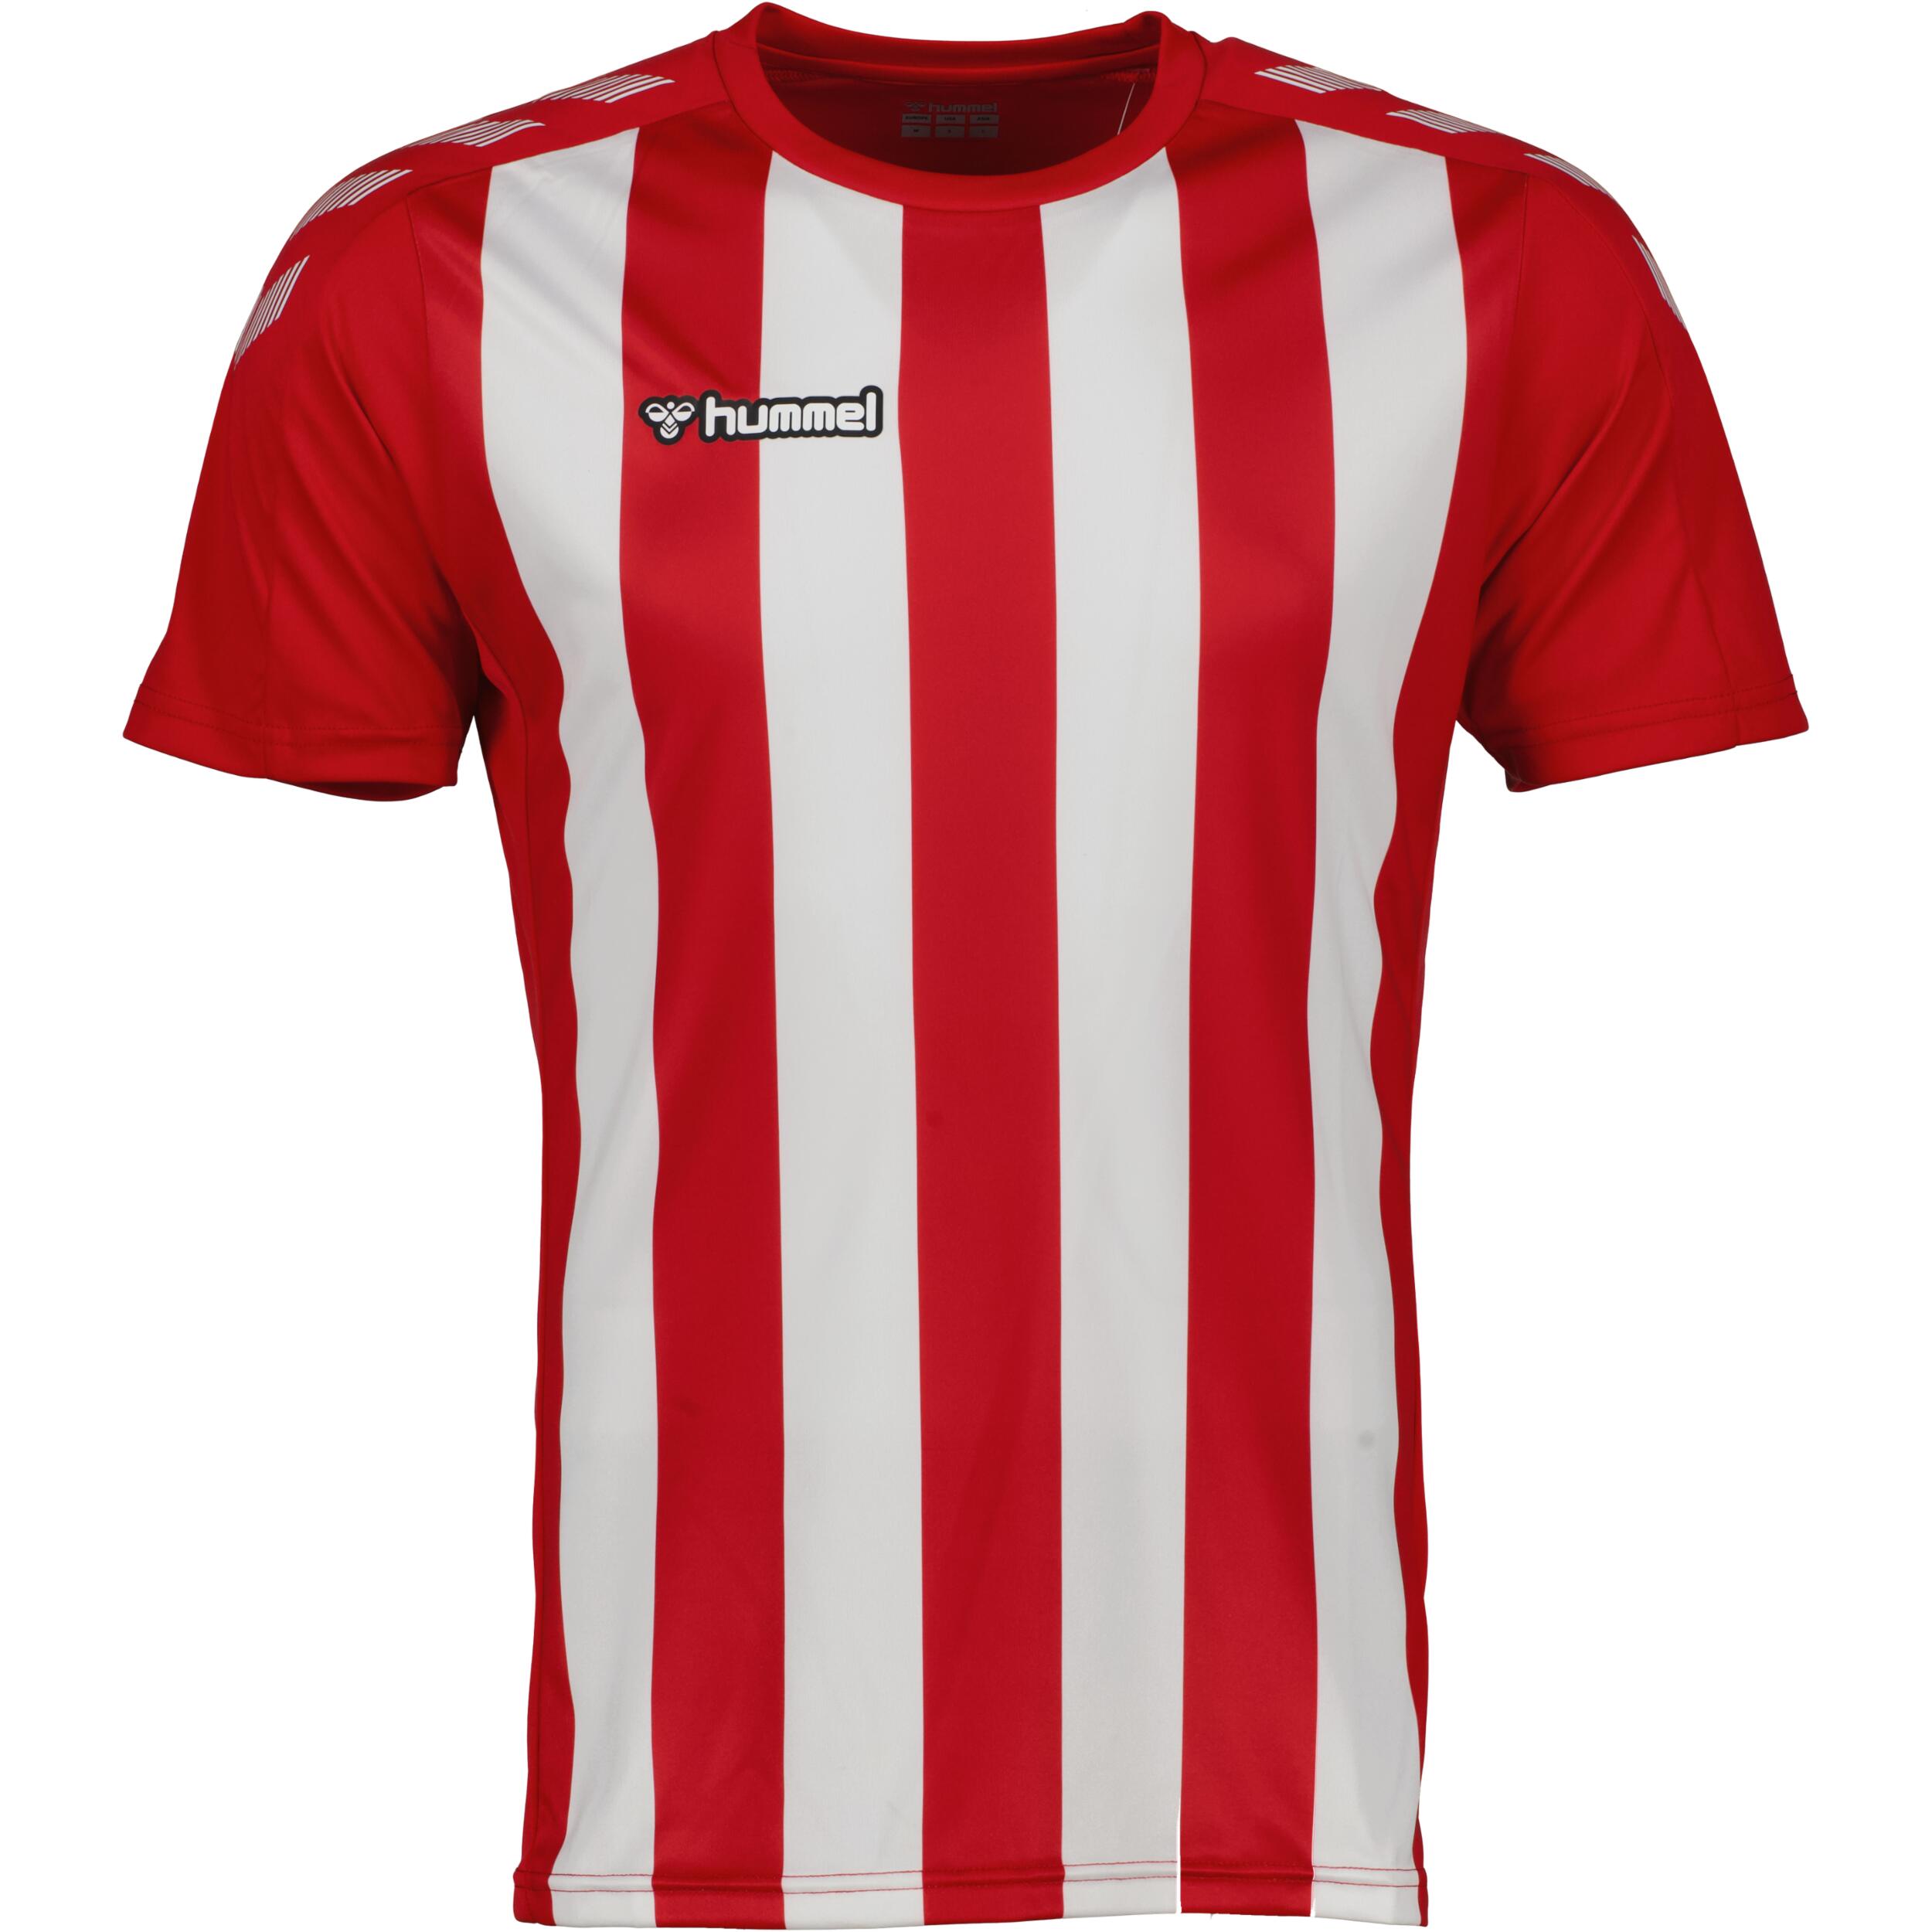 HUMMEL Stripe jersey for kids, great for football, in true red/white